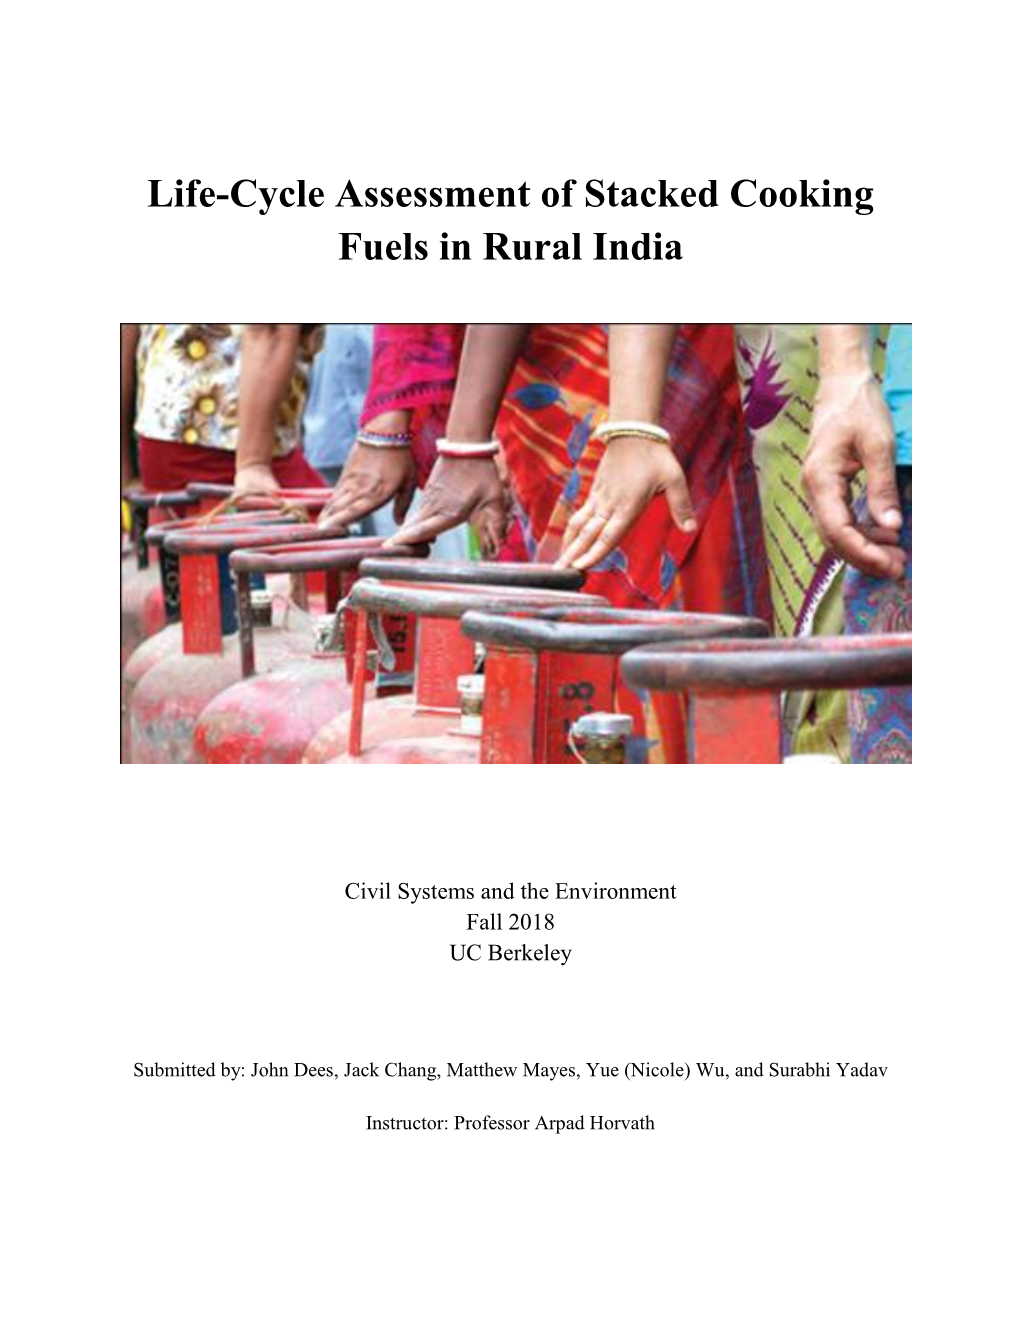 Life-Cycle Assessment of Stacked Cooking Fuels in Rural India